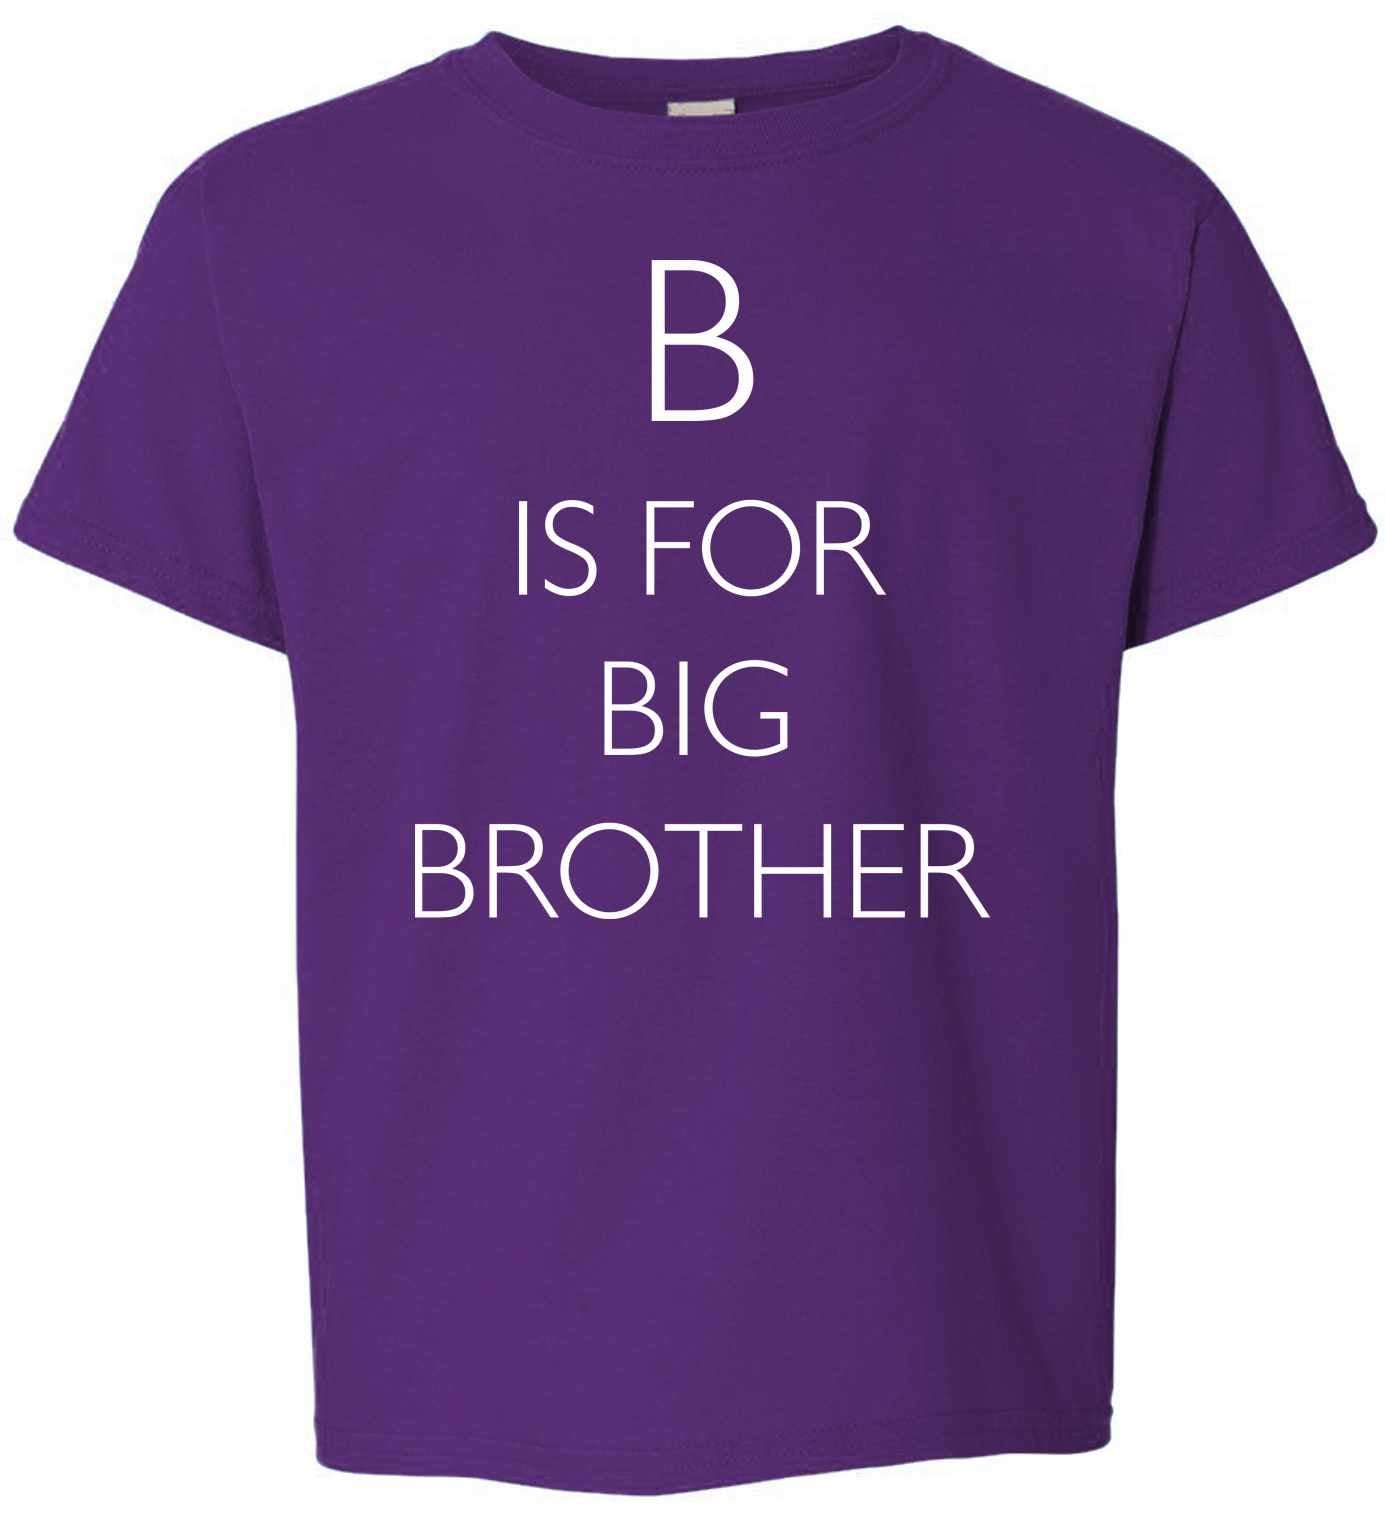 B is for Big Brother Youth T-Shirt (#1179-201)